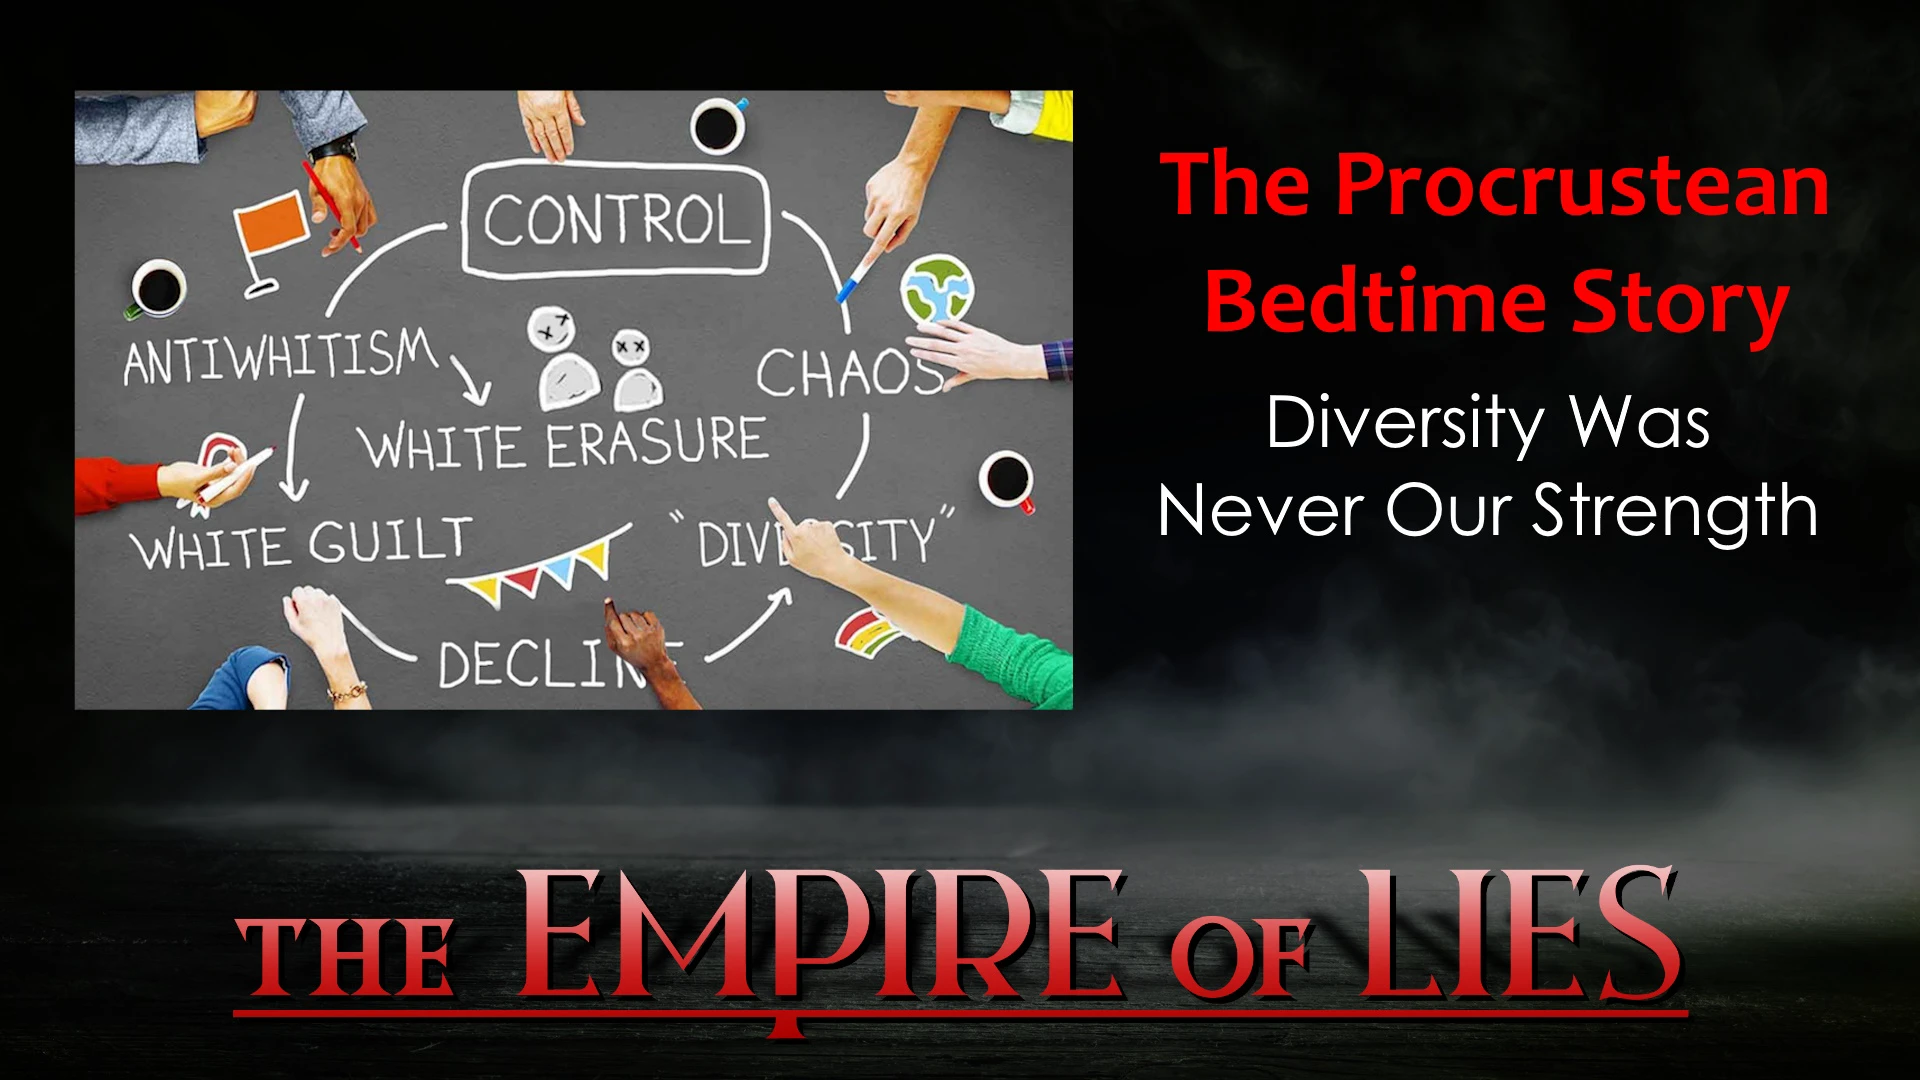 The Empire of Lies: The Procrustean Bedtime Story Diversity Was Never Our Strength (Bowling Alone)